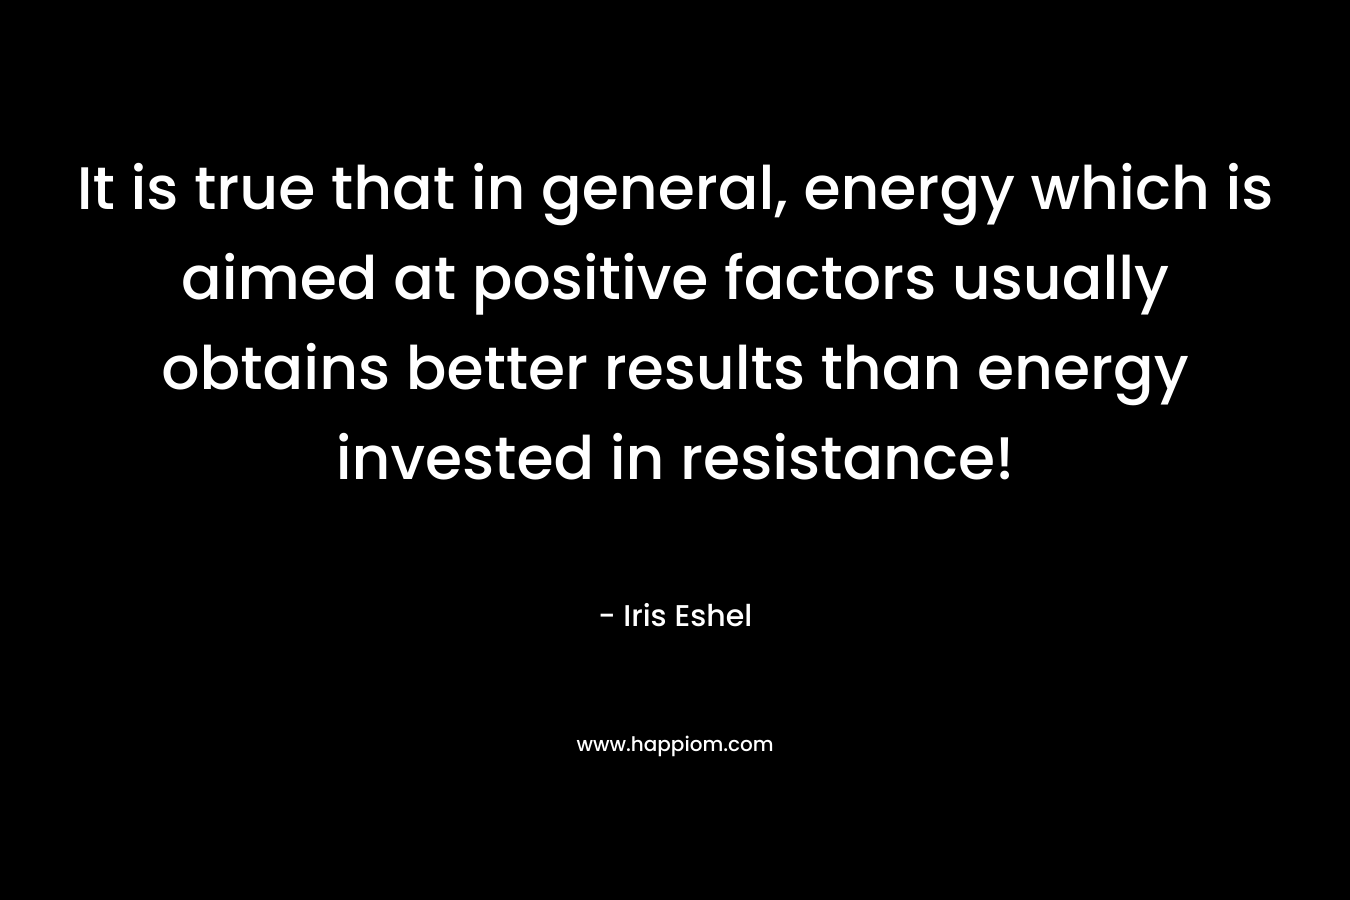 It is true that in general, energy which is aimed at positive factors usually obtains better results than energy invested in resistance!